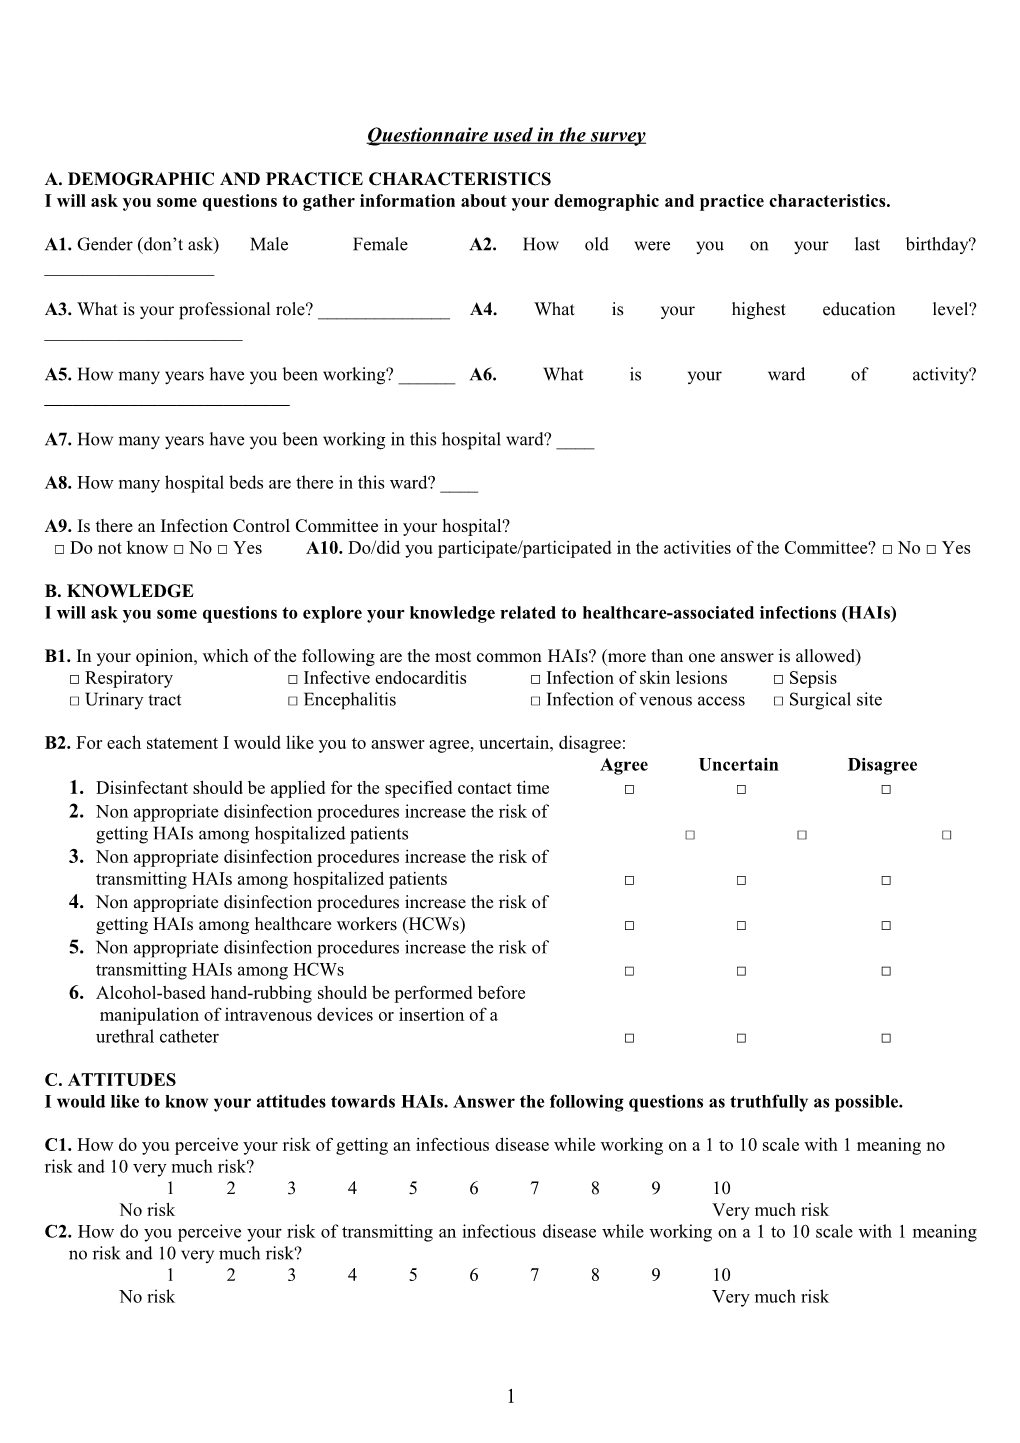 Questionnaire Used in the Survey